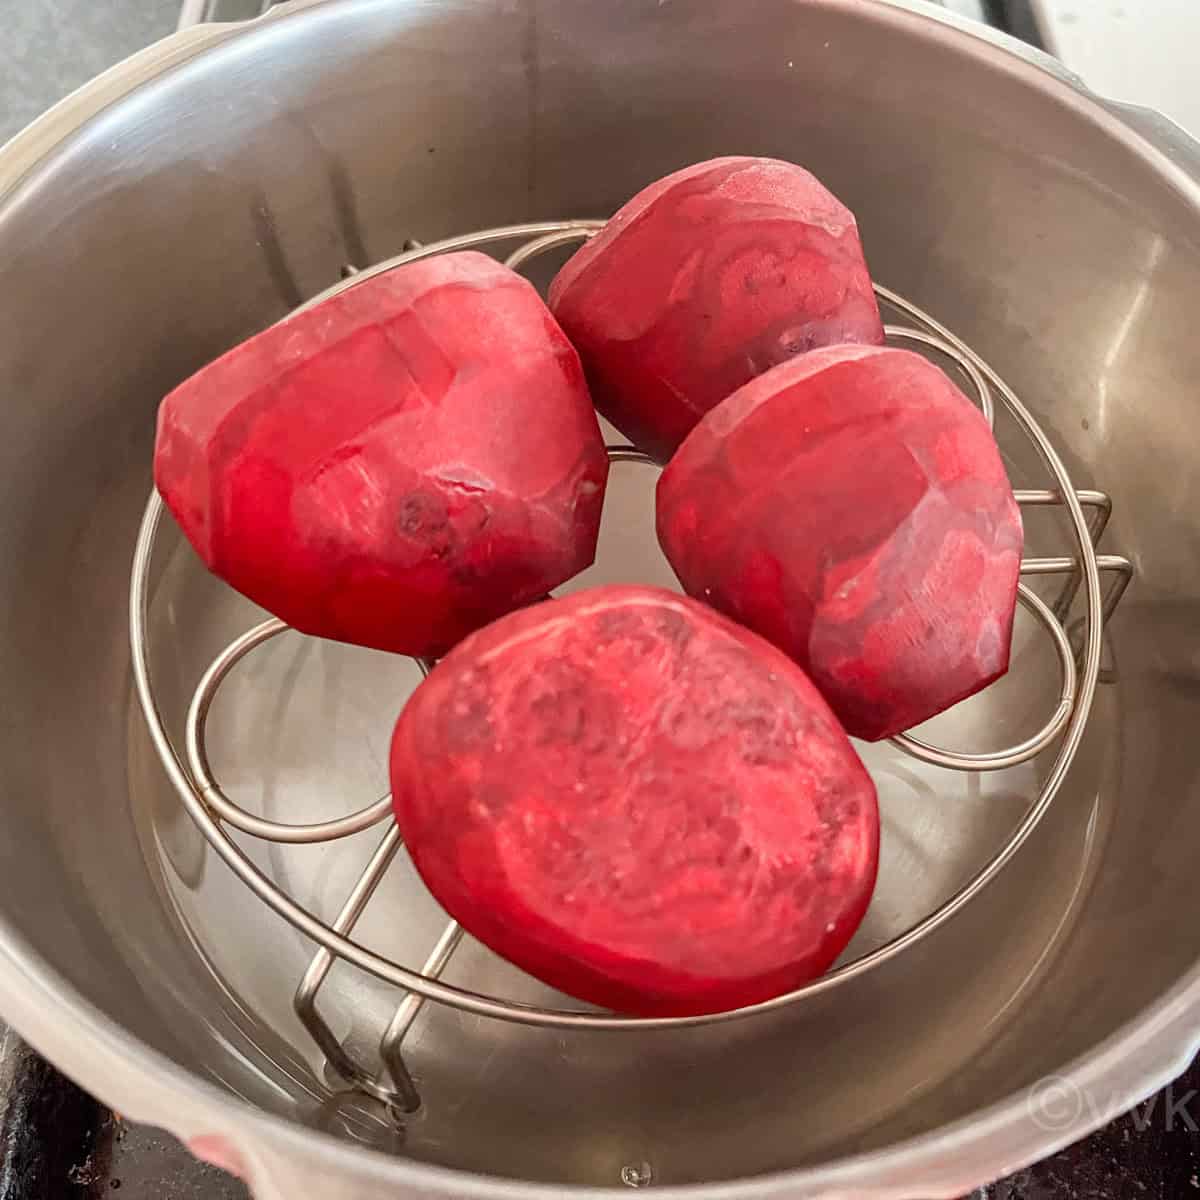 peeled beets ready for steaming